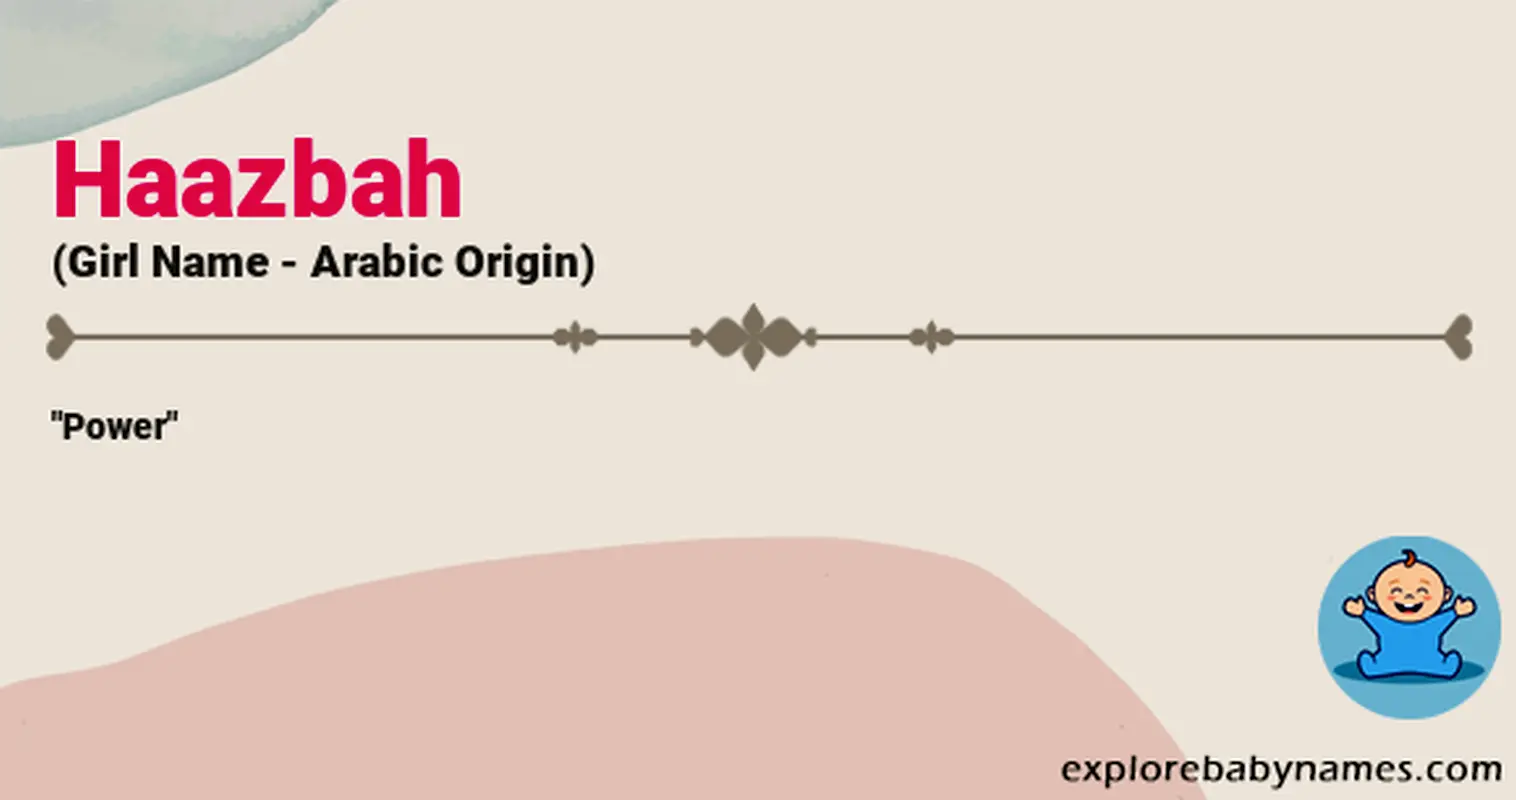 Meaning of Haazbah